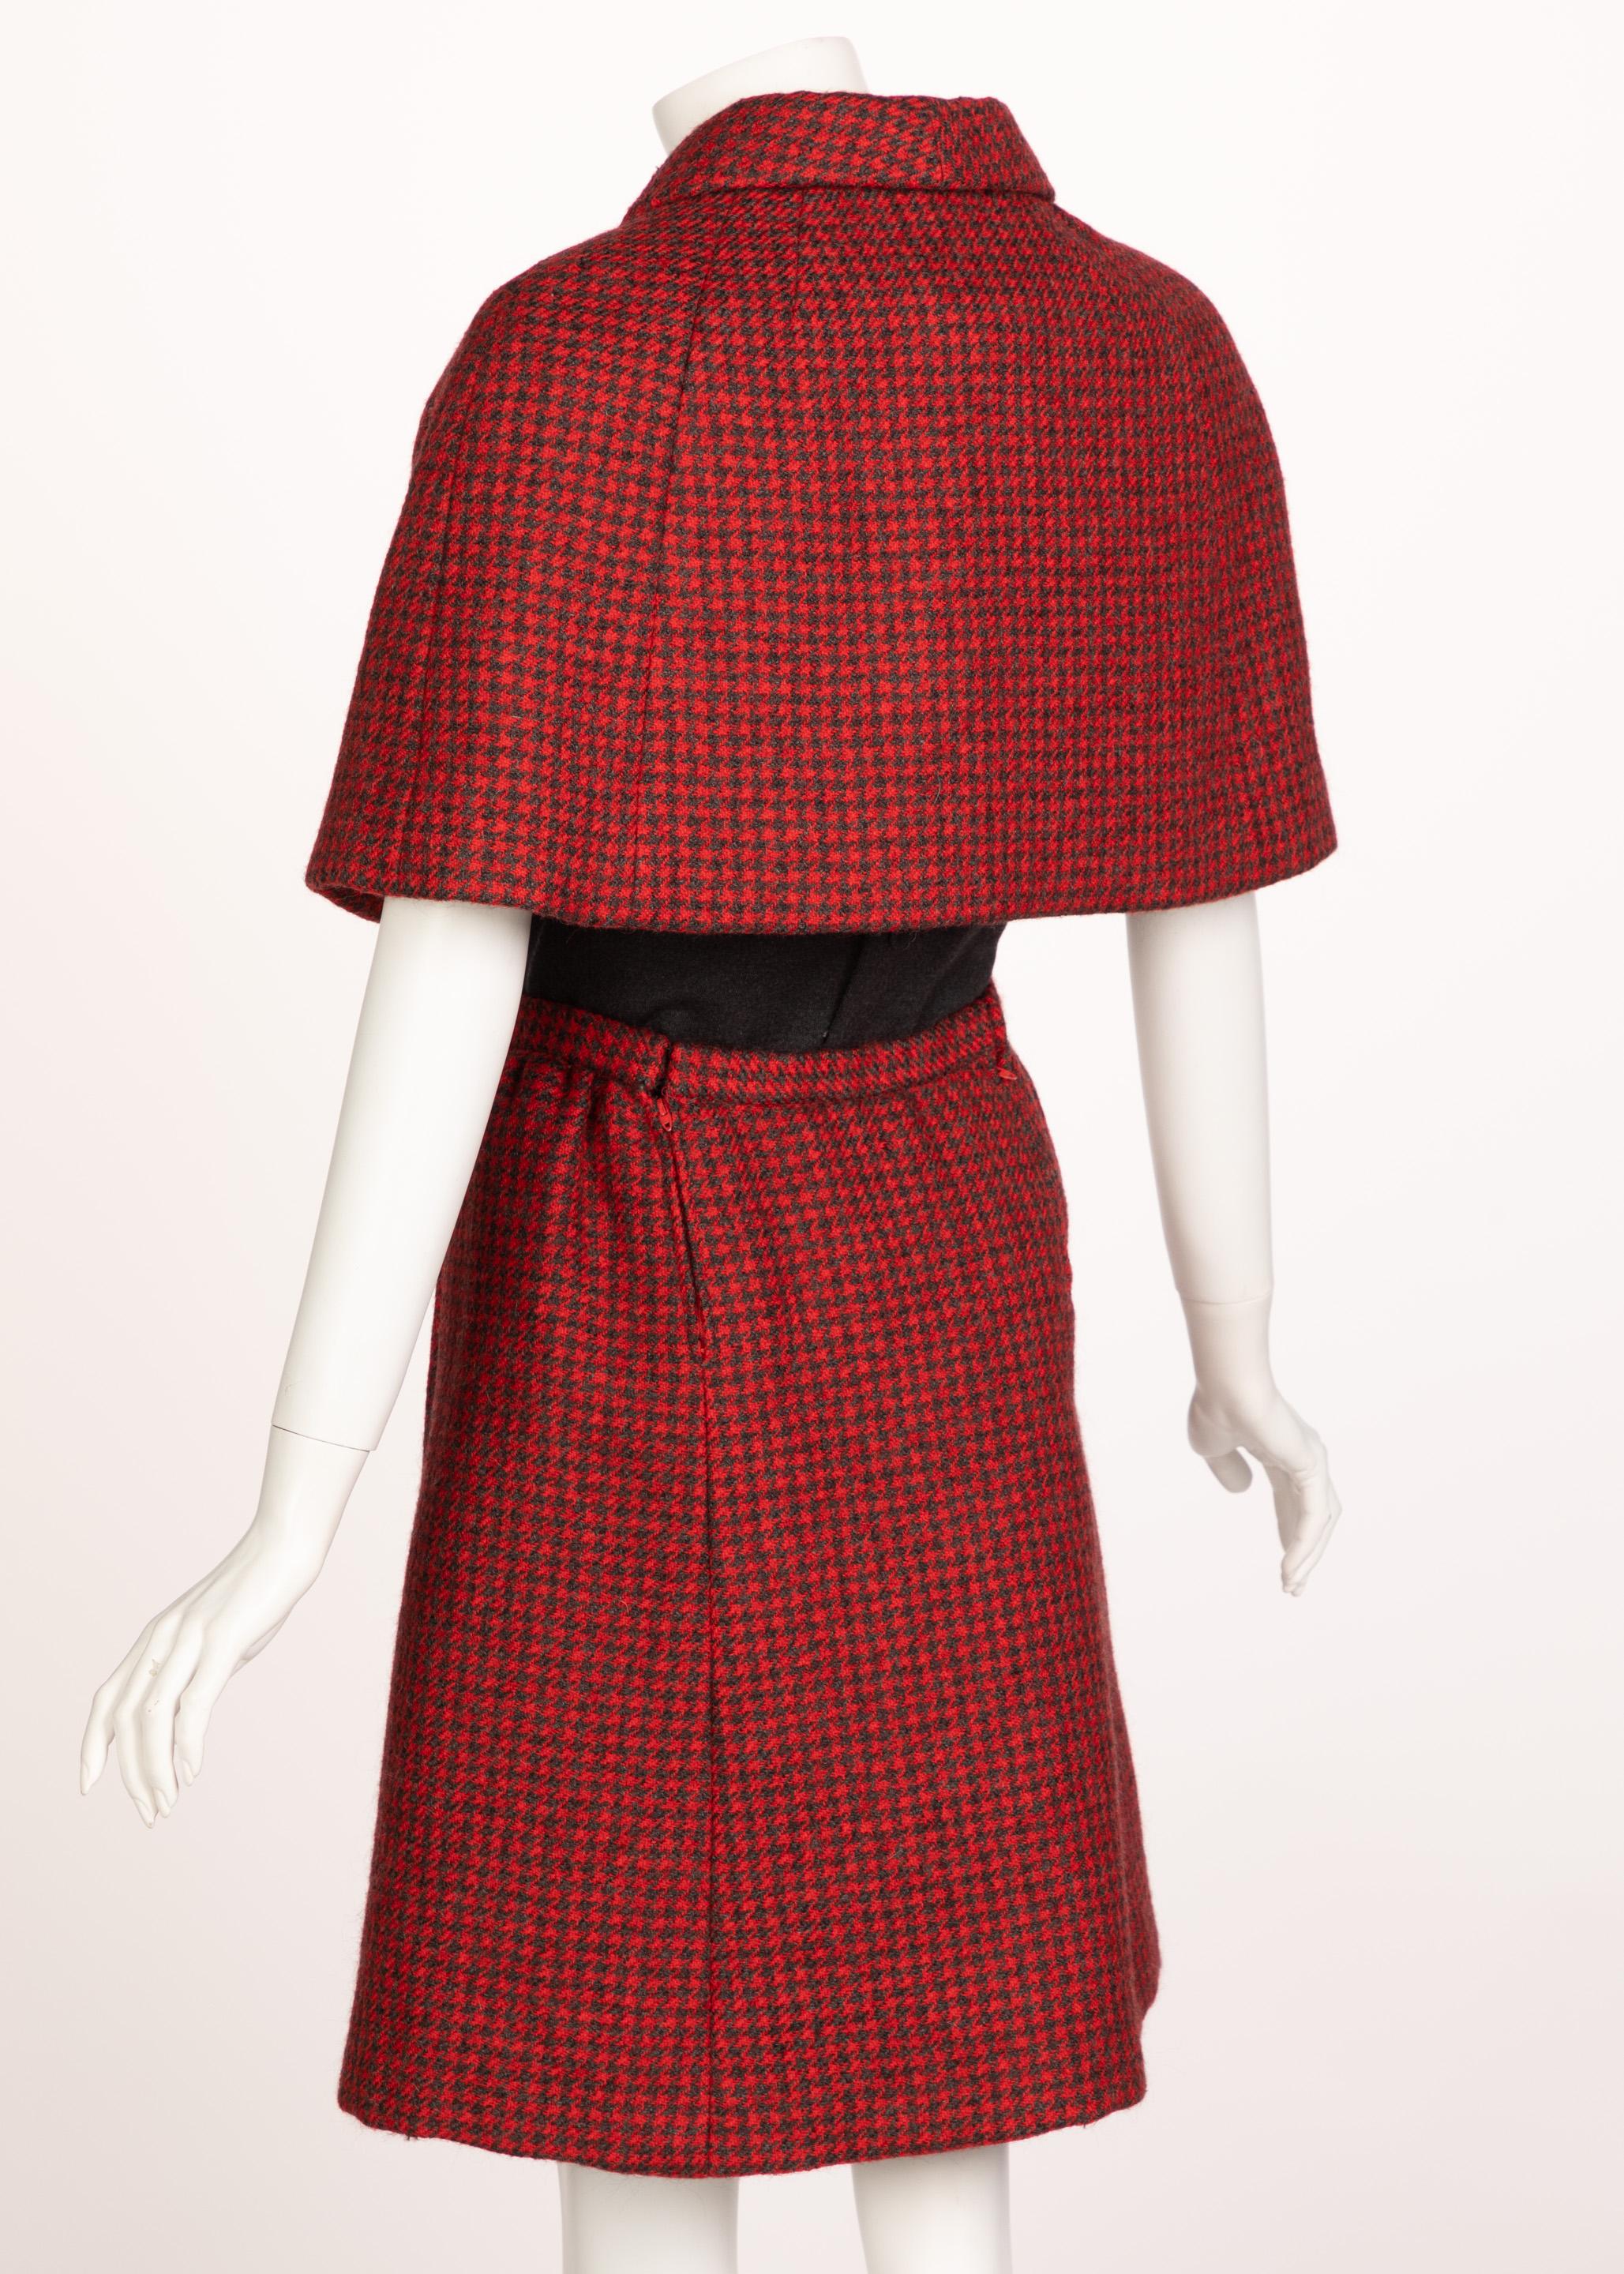 Red Norman Norell wool Dress Cape Ensemble, 1960s